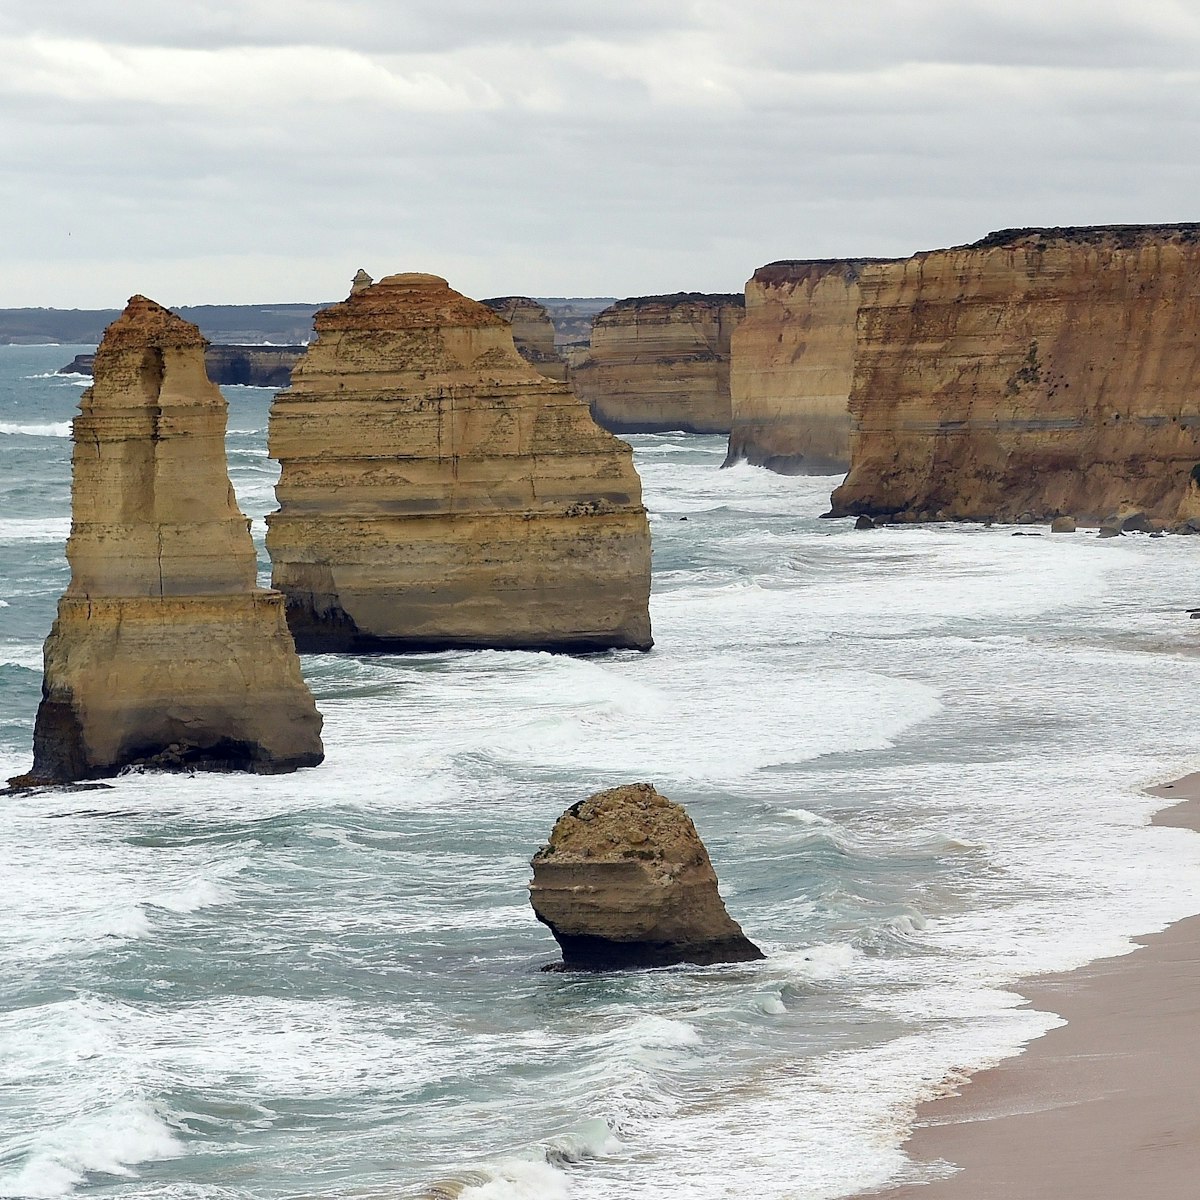 In this photo taken on March 24, 2015, waves crash into the base of natural limestone structures known as the Twelve Apostles off the shore of the Port Campbell National Park, by the Great Ocean road in Victoria. The close proximity of the collection of limestone stacks to one another has made the site a popular tourist attraction.  AFP PHOTO / INDRANIL MUKHERJEE        (Photo credit should read INDRANIL MUKHERJEE/AFP/Getty Images)